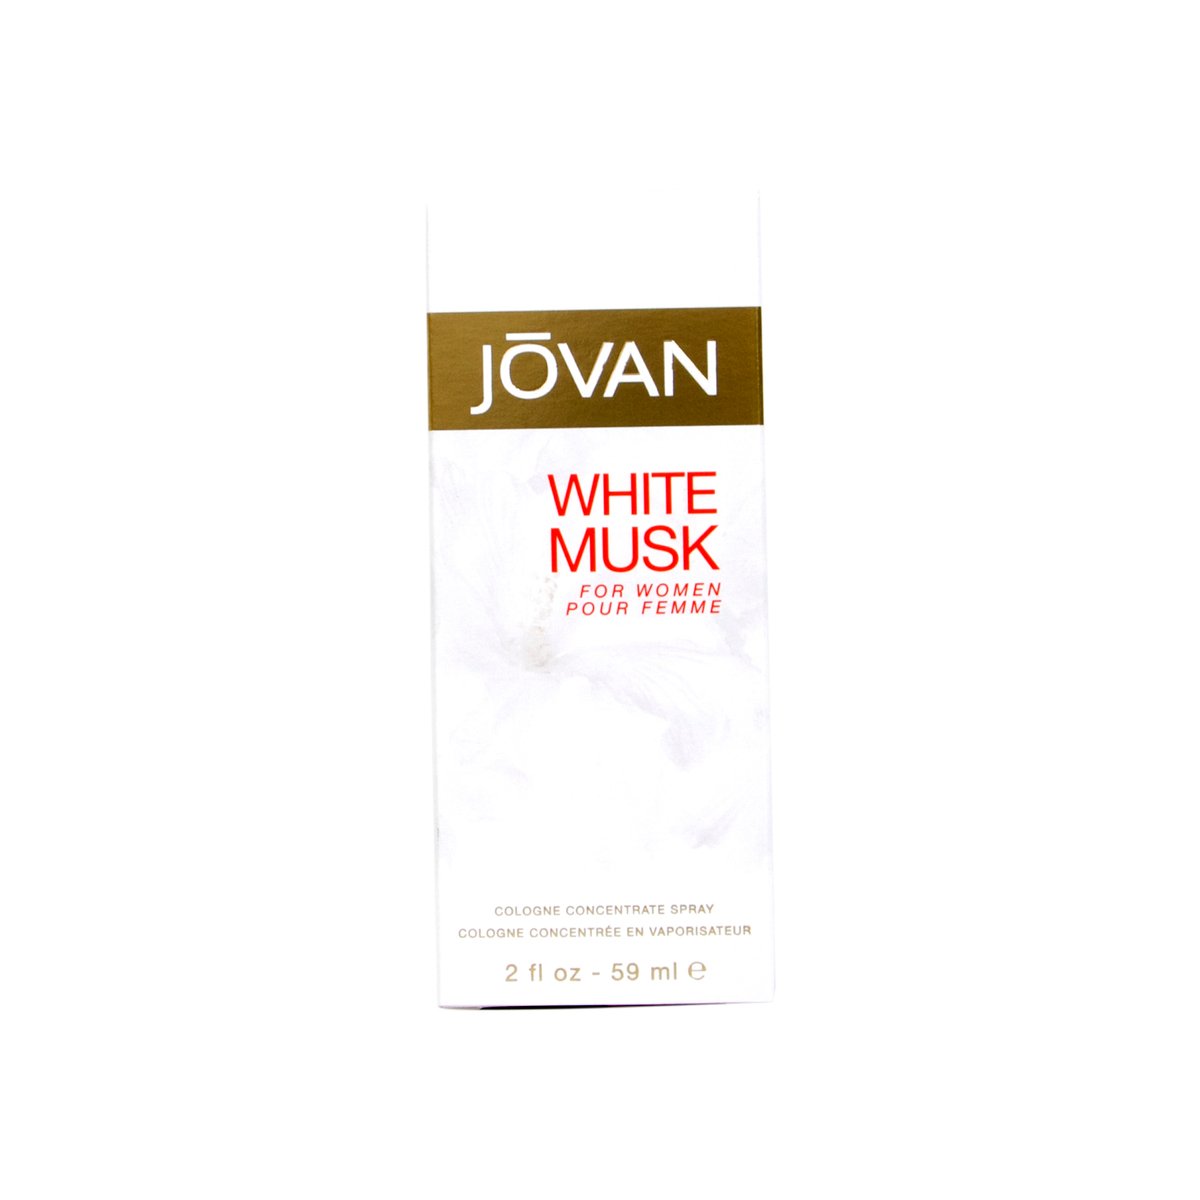 Jovan White Musk For Women Cologne Concentrate Spray 59ml